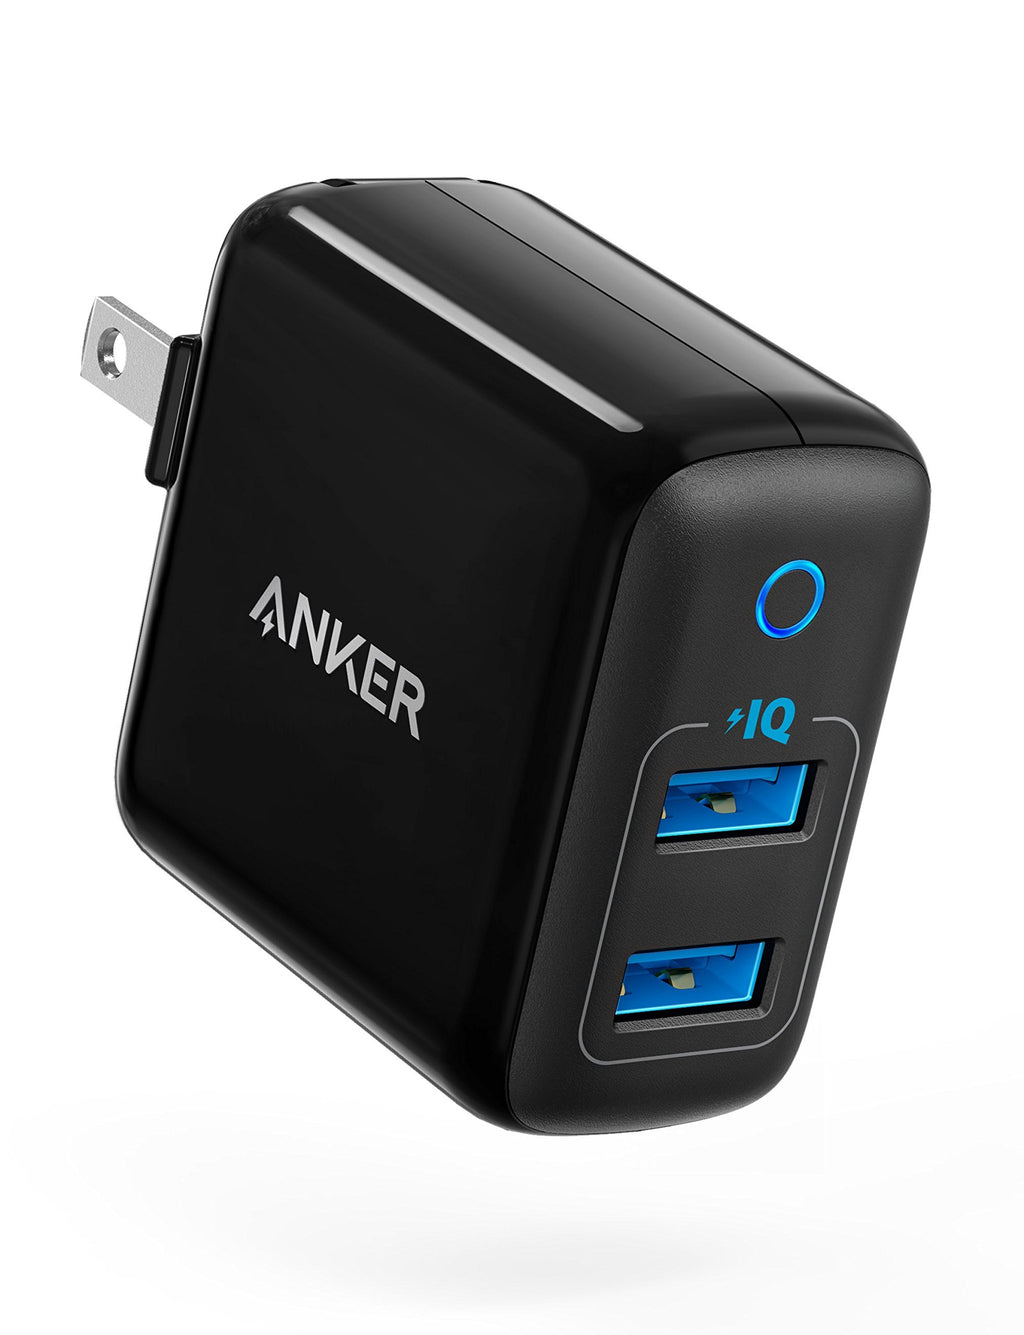 Anker Dual USB Wall Charger, PowerPort II 24W, Ultra-Compact Travel Charger with PowerIQ Technology and Foldable Plug, for iPhone XS/Max/XR/X/8/7/6/Plus, iPad Pro/Air 2/mini 4, Galaxy S9/S8/+ and More Black